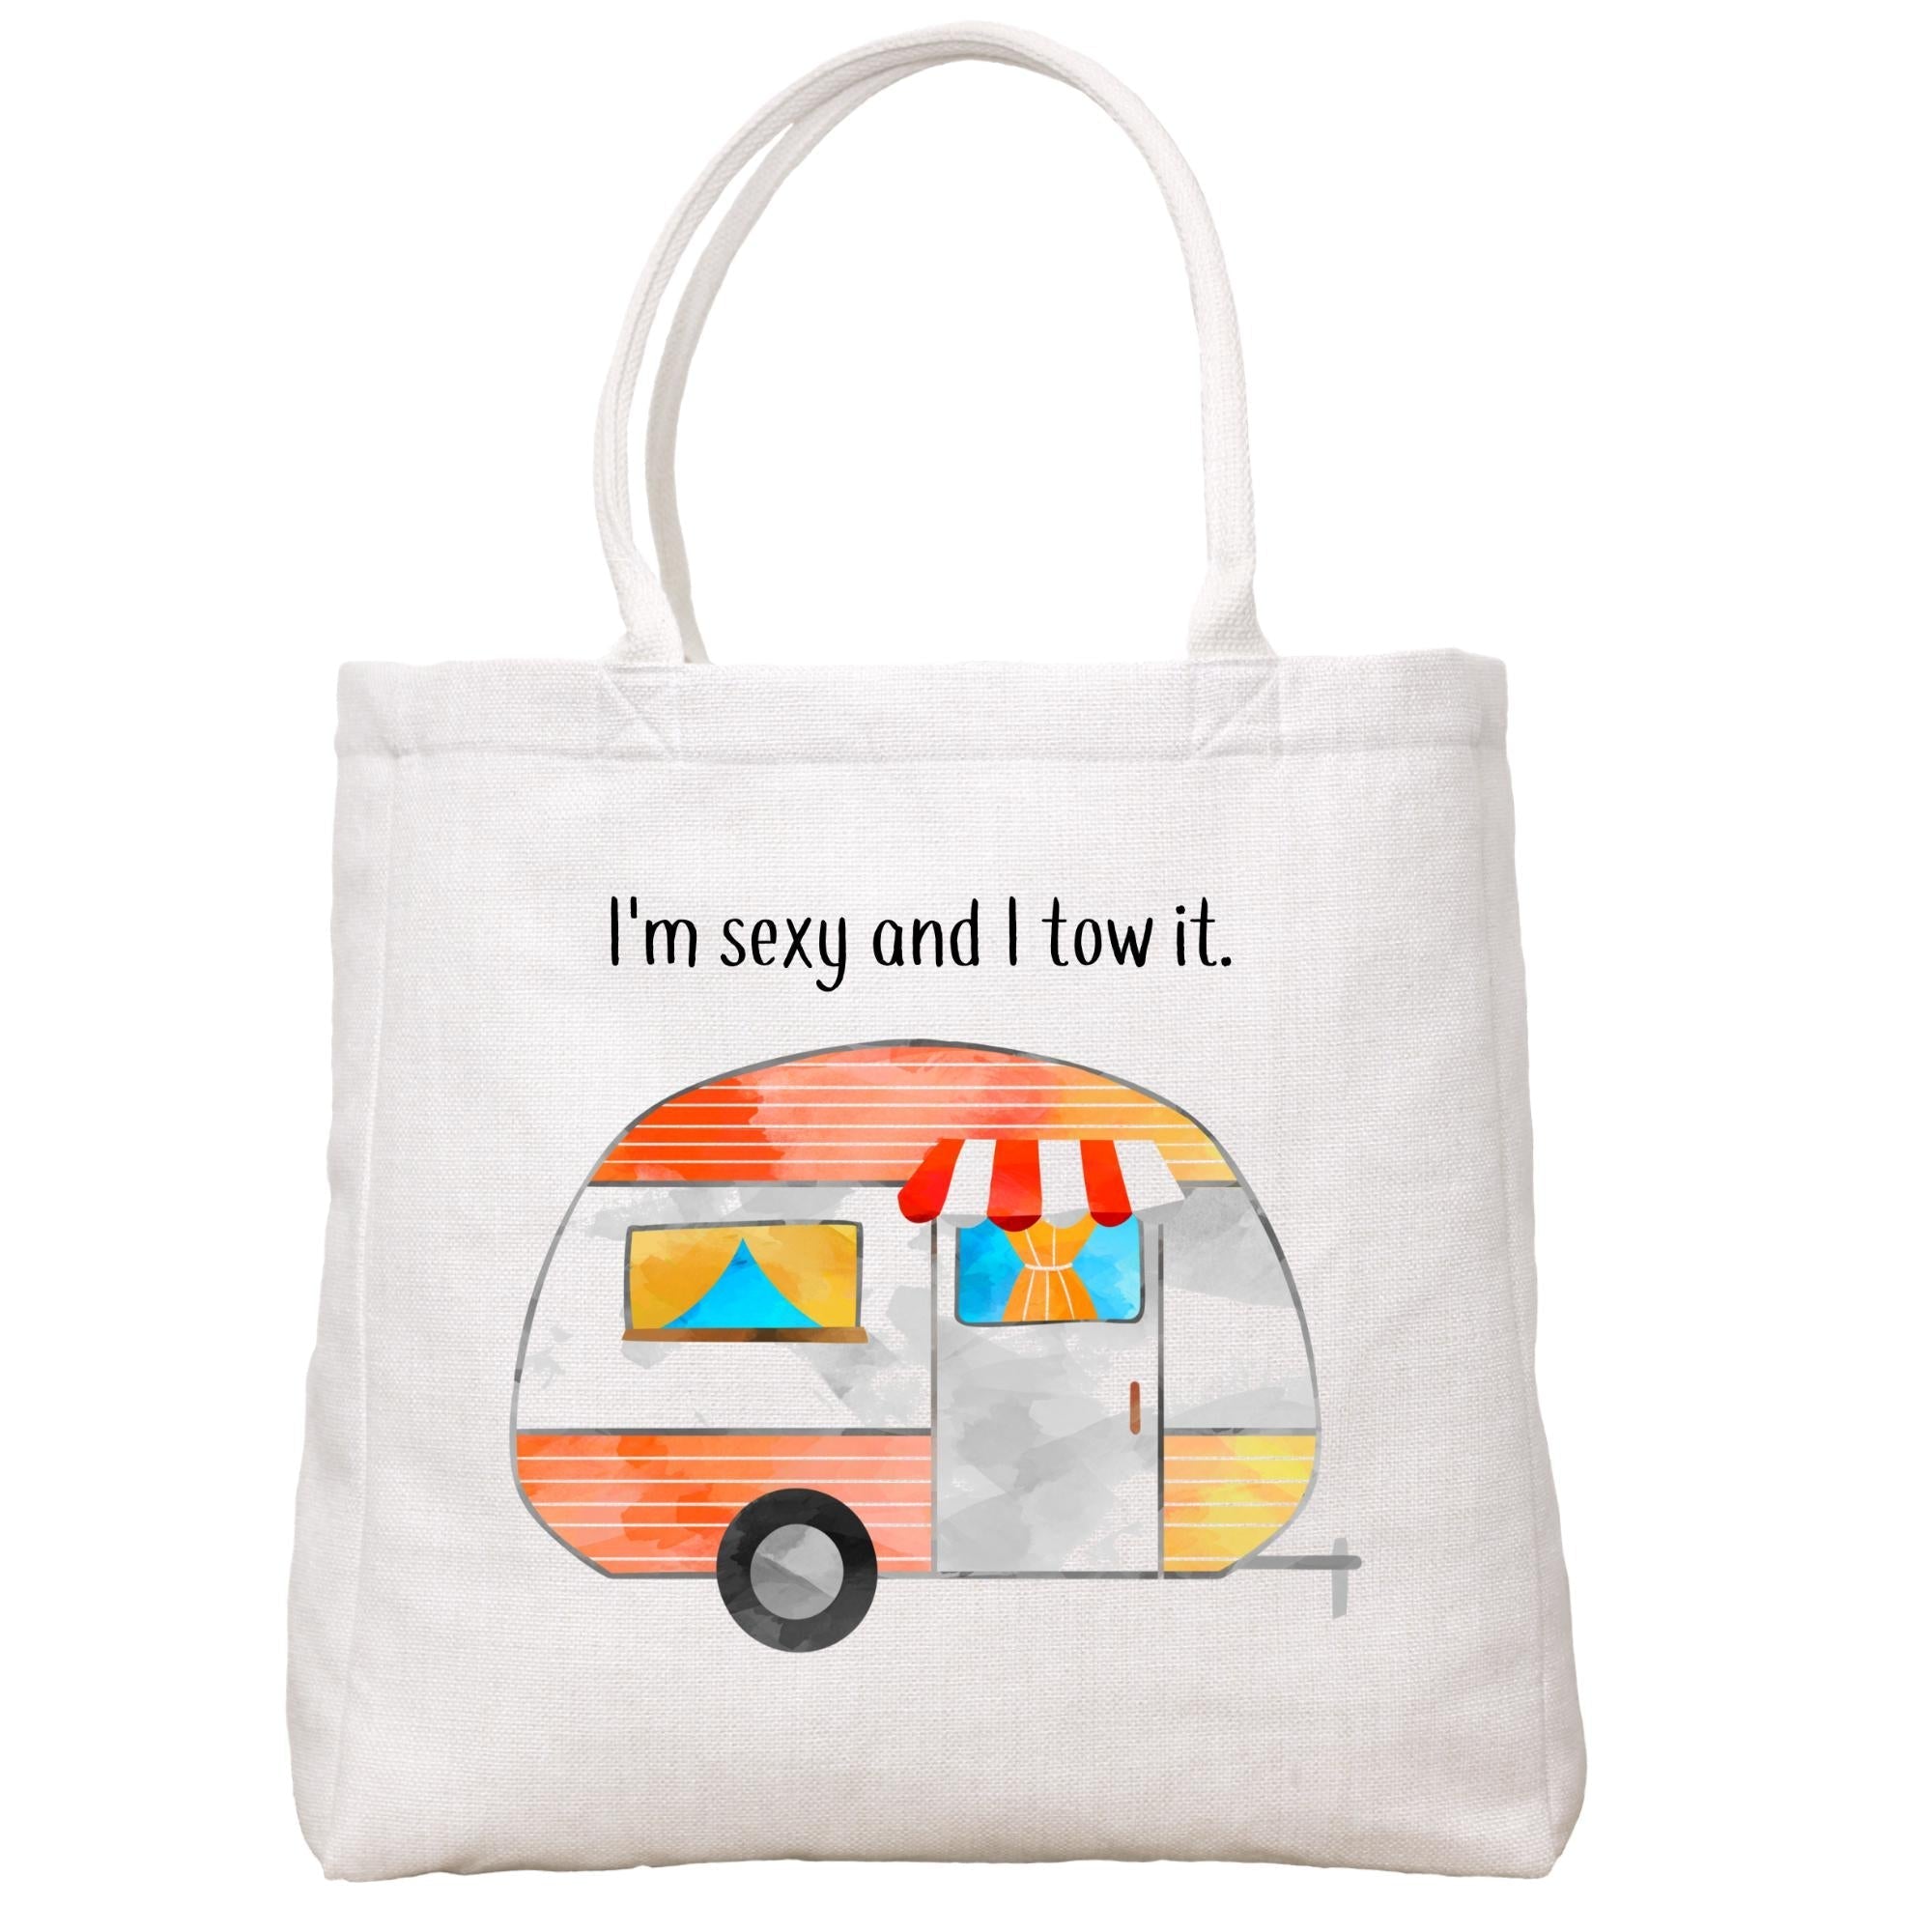 Tow It Tote Bag Tote Bag - Southern Sisters